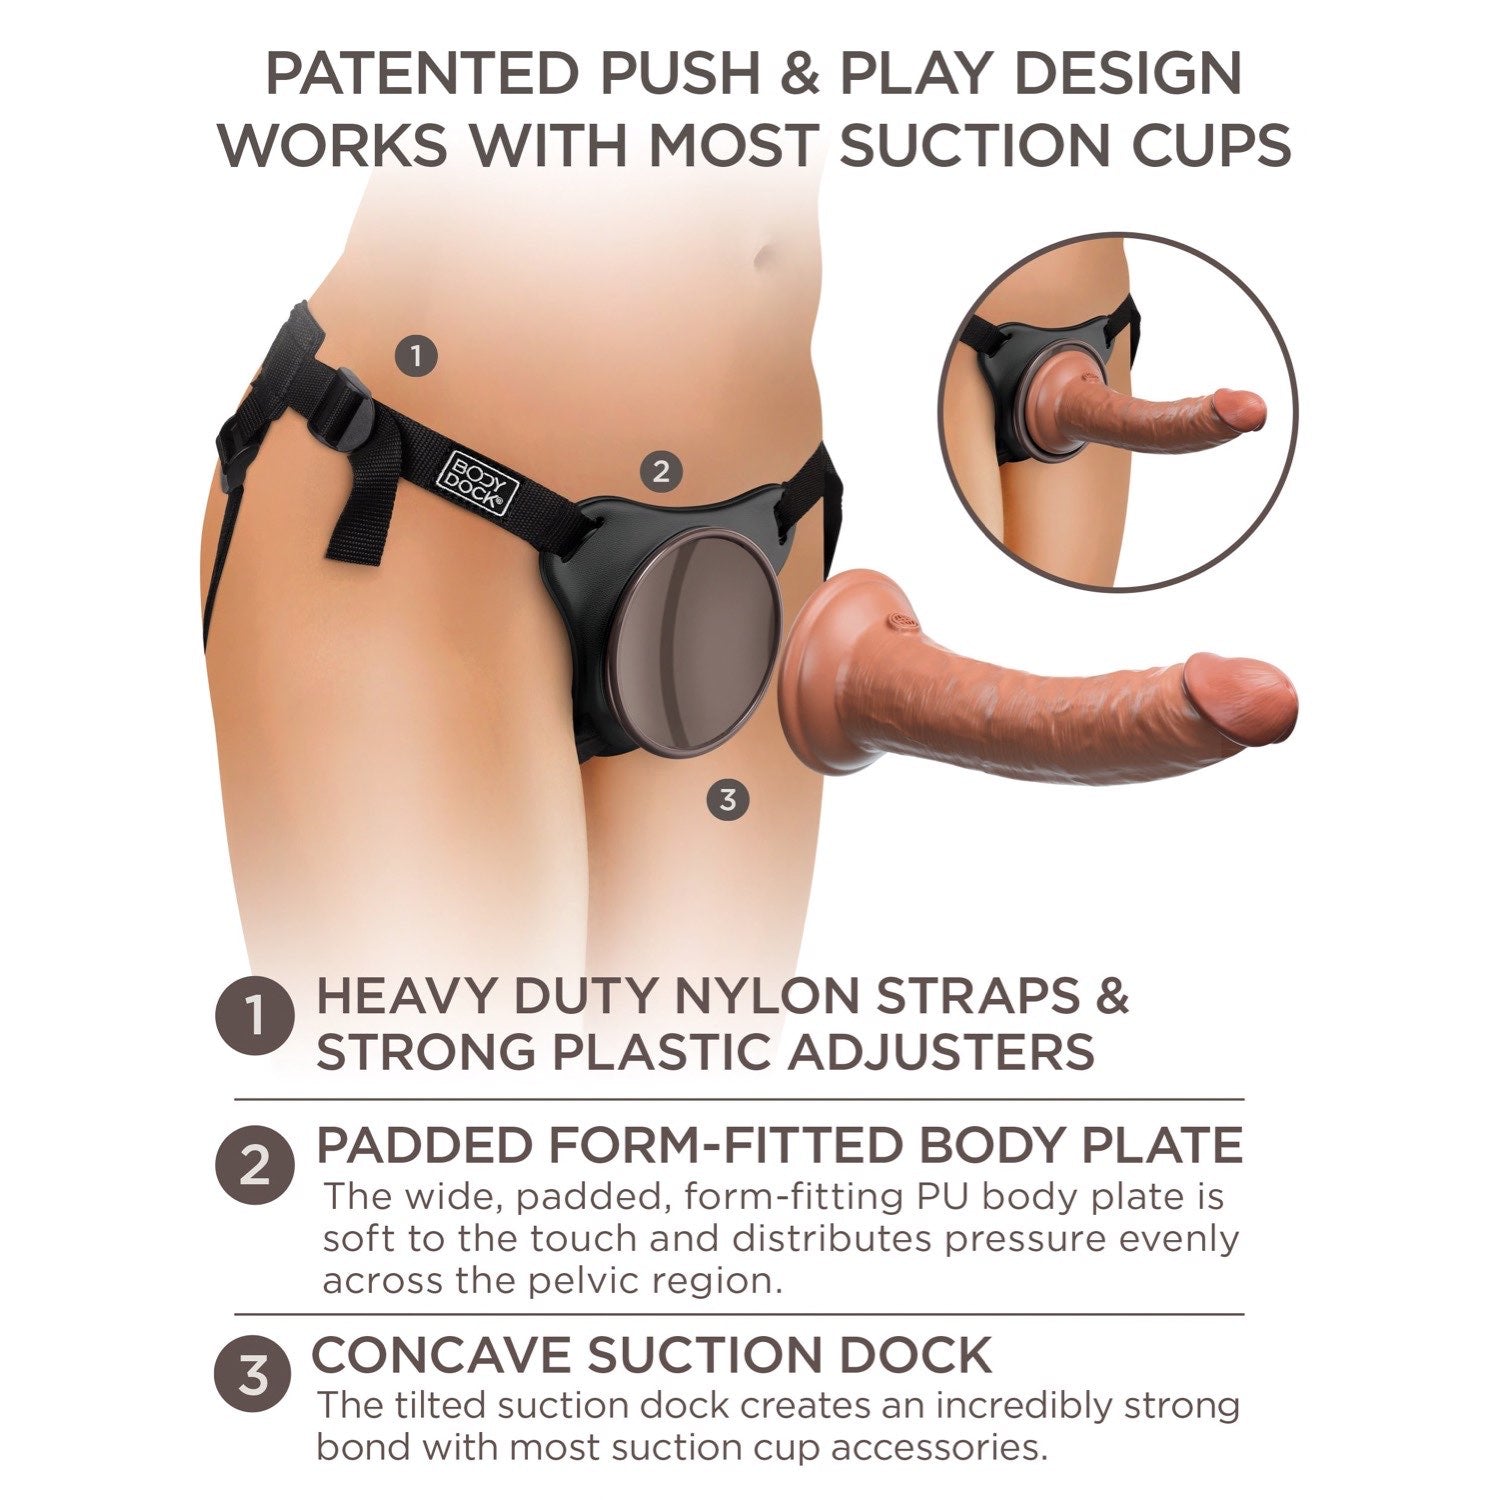 King Cock Elite Comfy Silicone Body Dock Kit - Body Dock Strap-On Harness with Tan 17.8 cm Dong by Pipedream